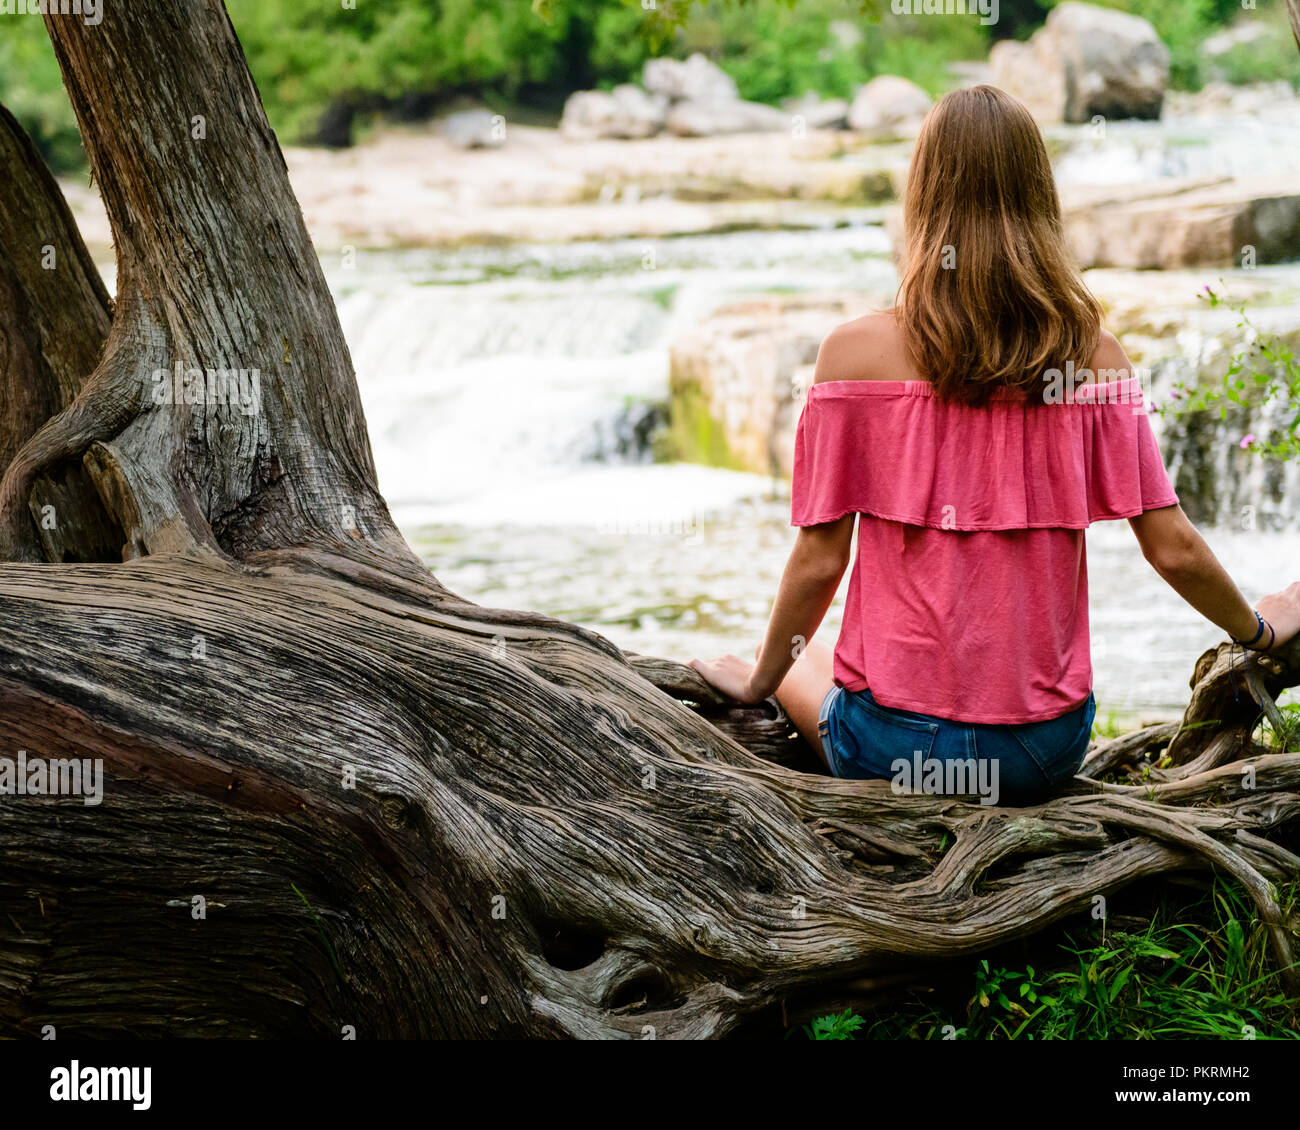 Teen Girl With Long Brown Hair Sitting On A Large Tree Branch With Waterfall In The Background Stock Photo